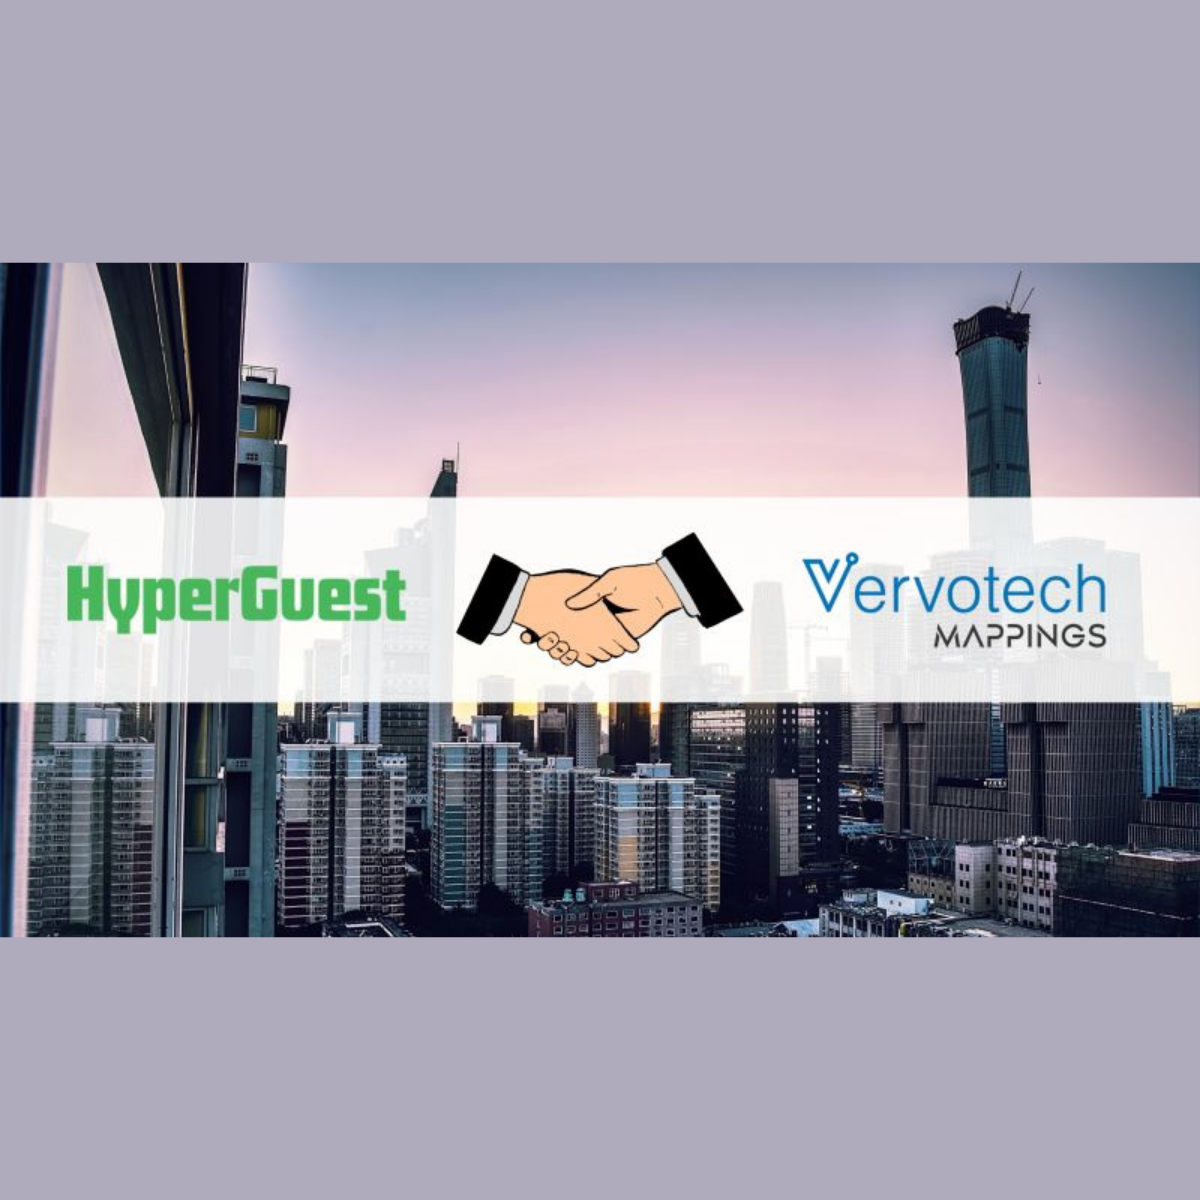 HyperGuest and Vervotech announce partnership for Distribution 2.0